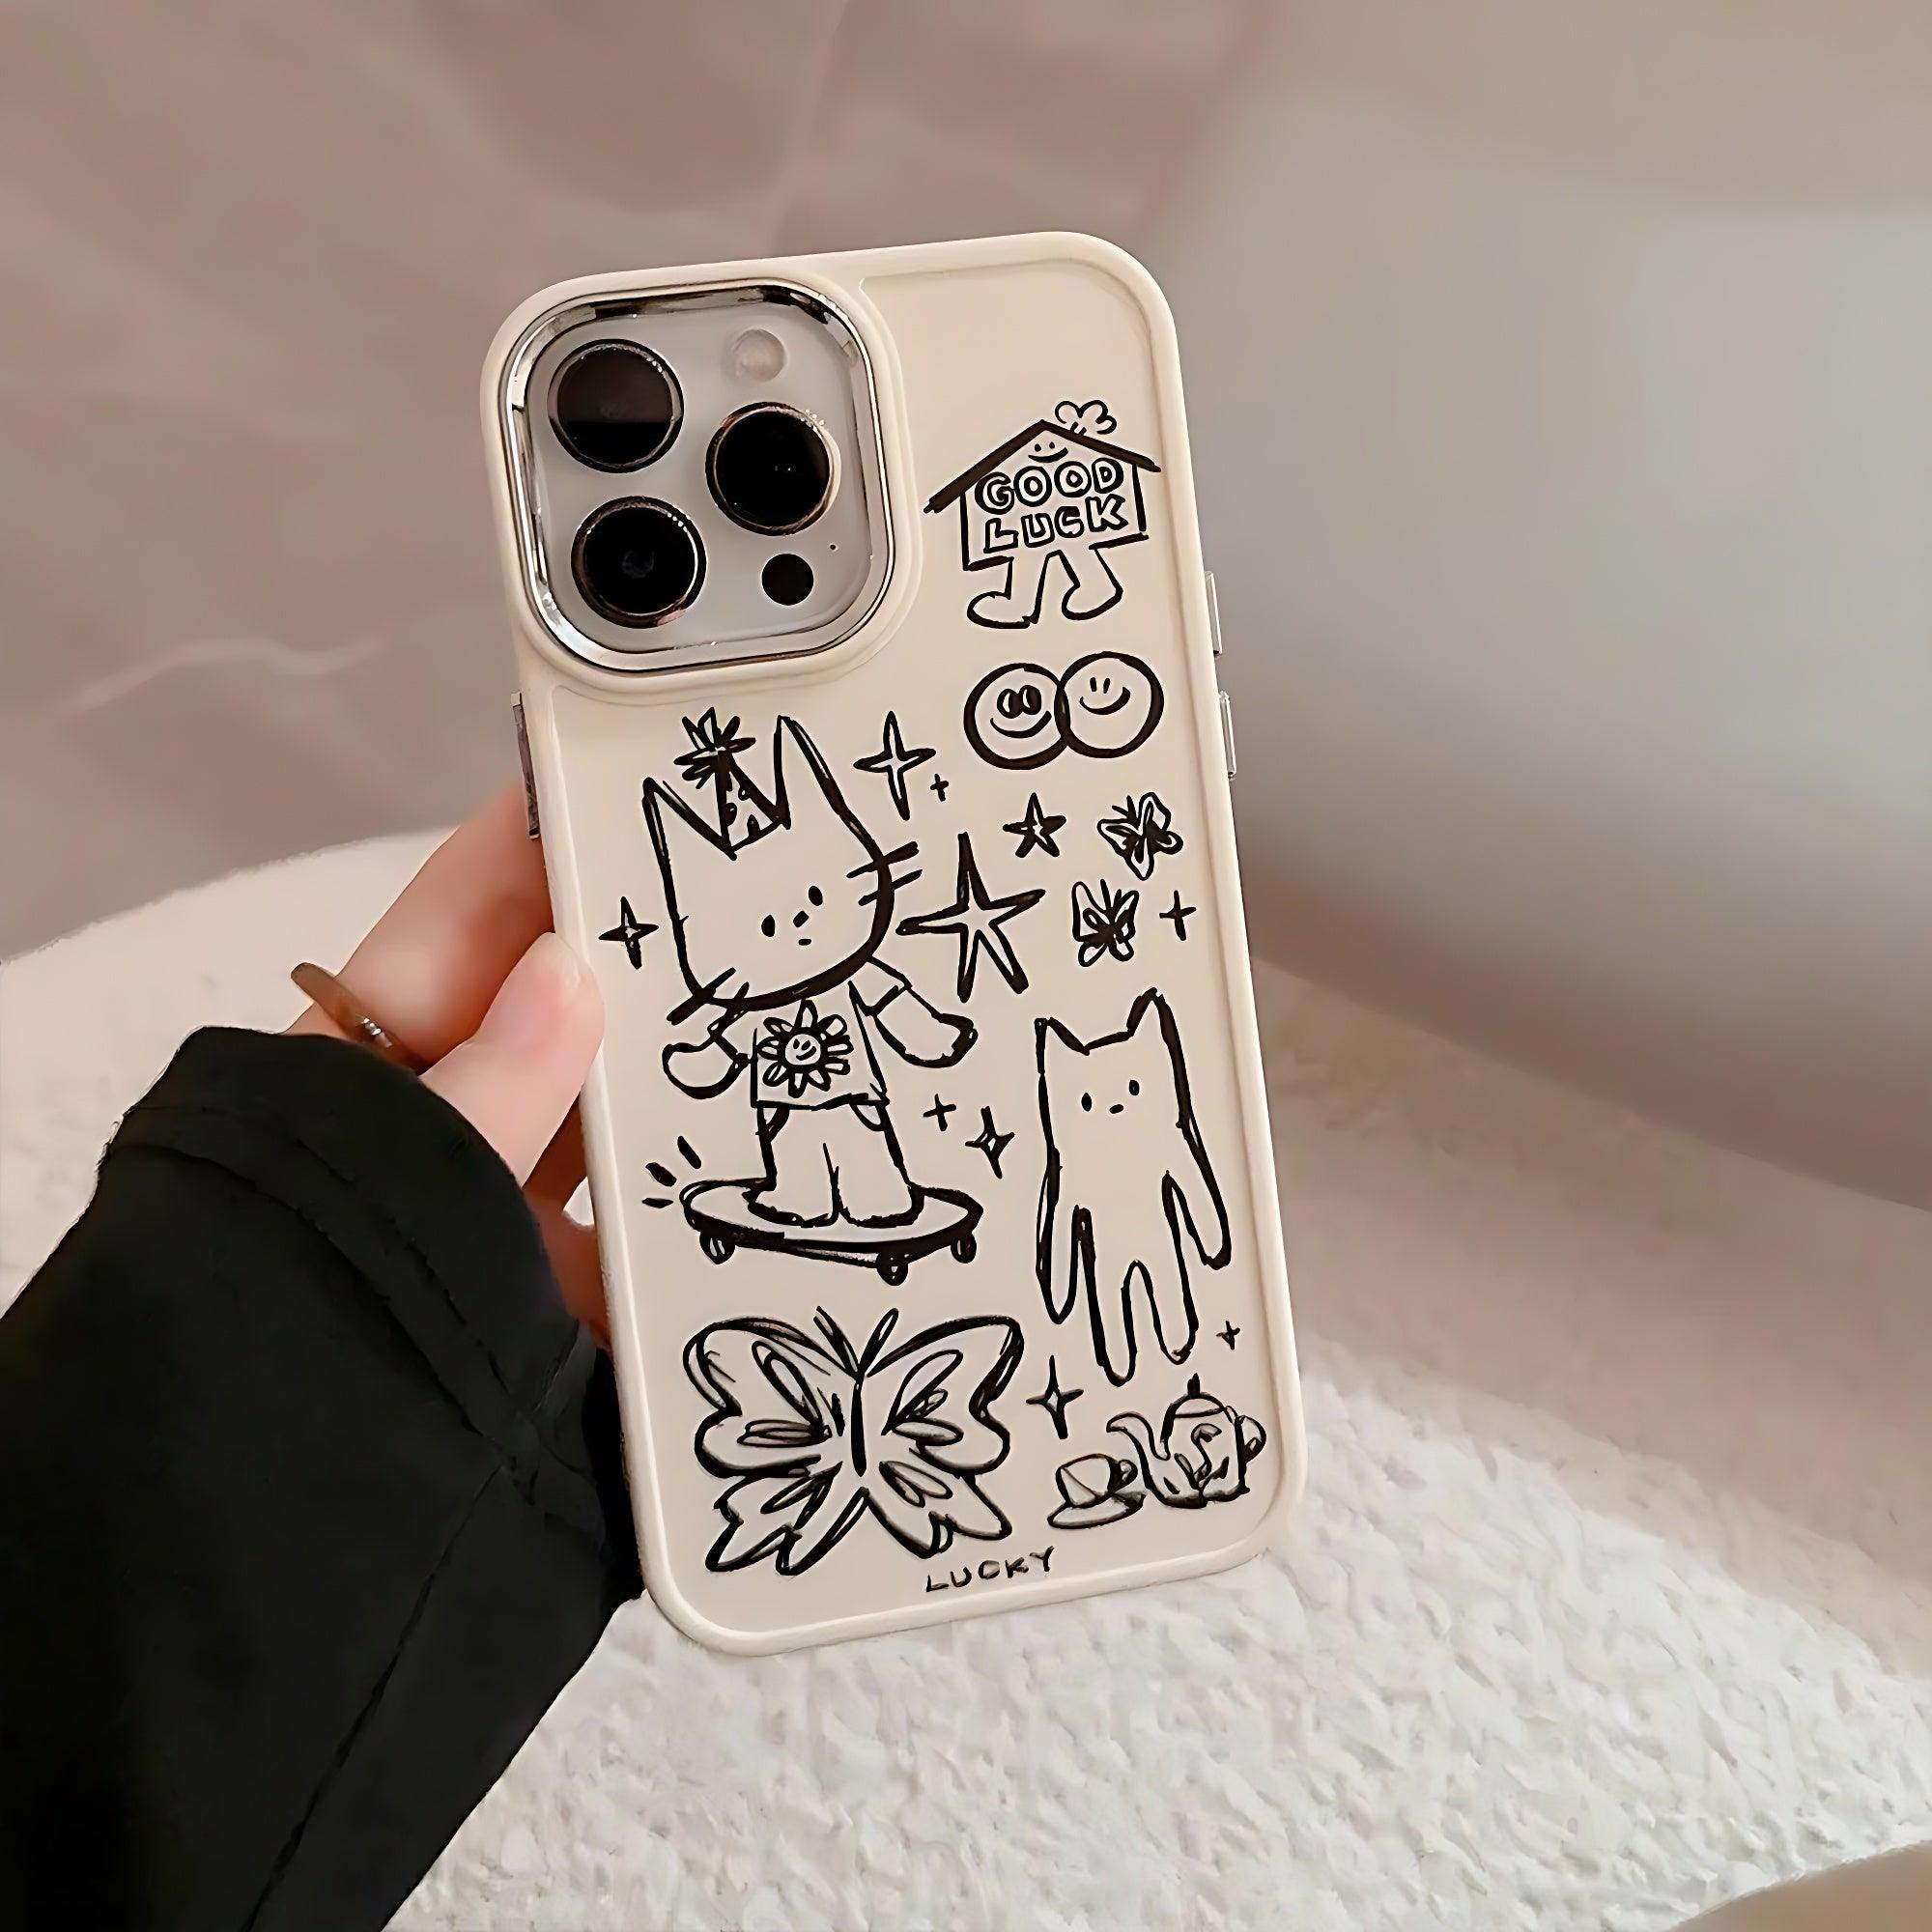 iPhone 7 Cute Phone Cases - Touchy Style .